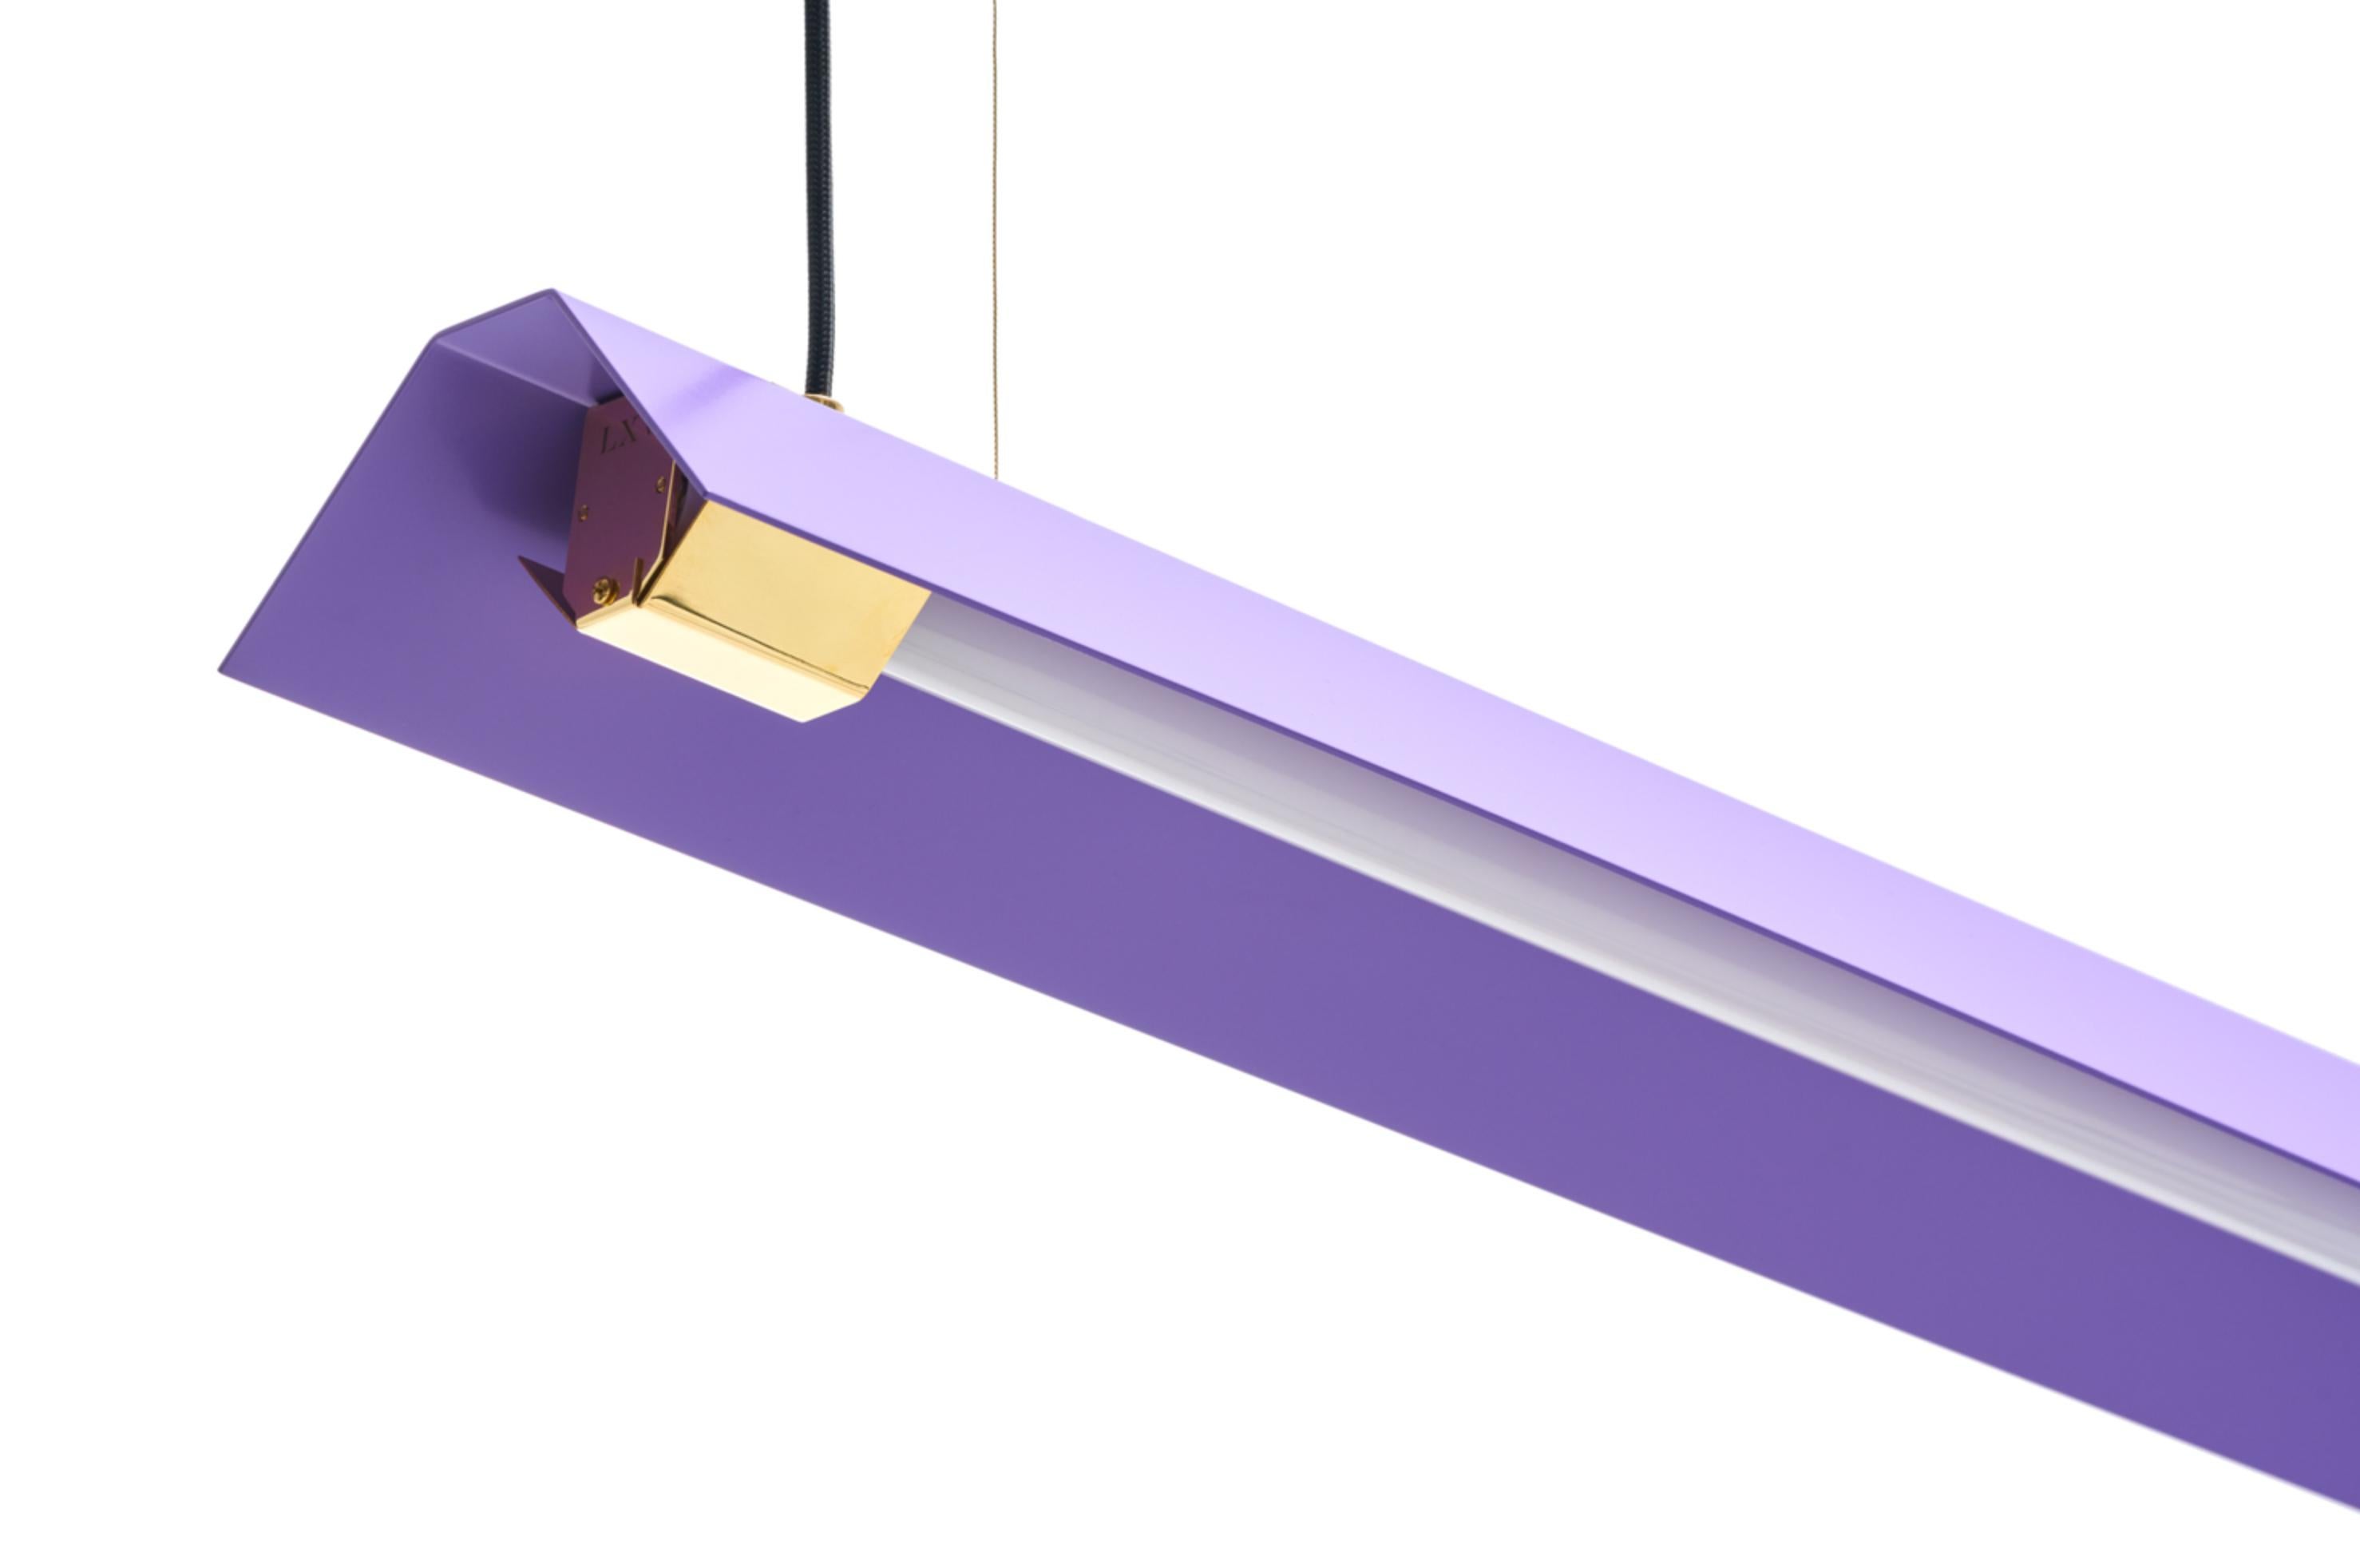 Medium Misalliance Ex Lavender suspended light by Lexavala
Dimensions: D 16 x W 100 x H 8 cm
Materials: powder coated shade with details made of brass or stainless steel.

There are two lenghts of socket covers, extending over the LED. Two short